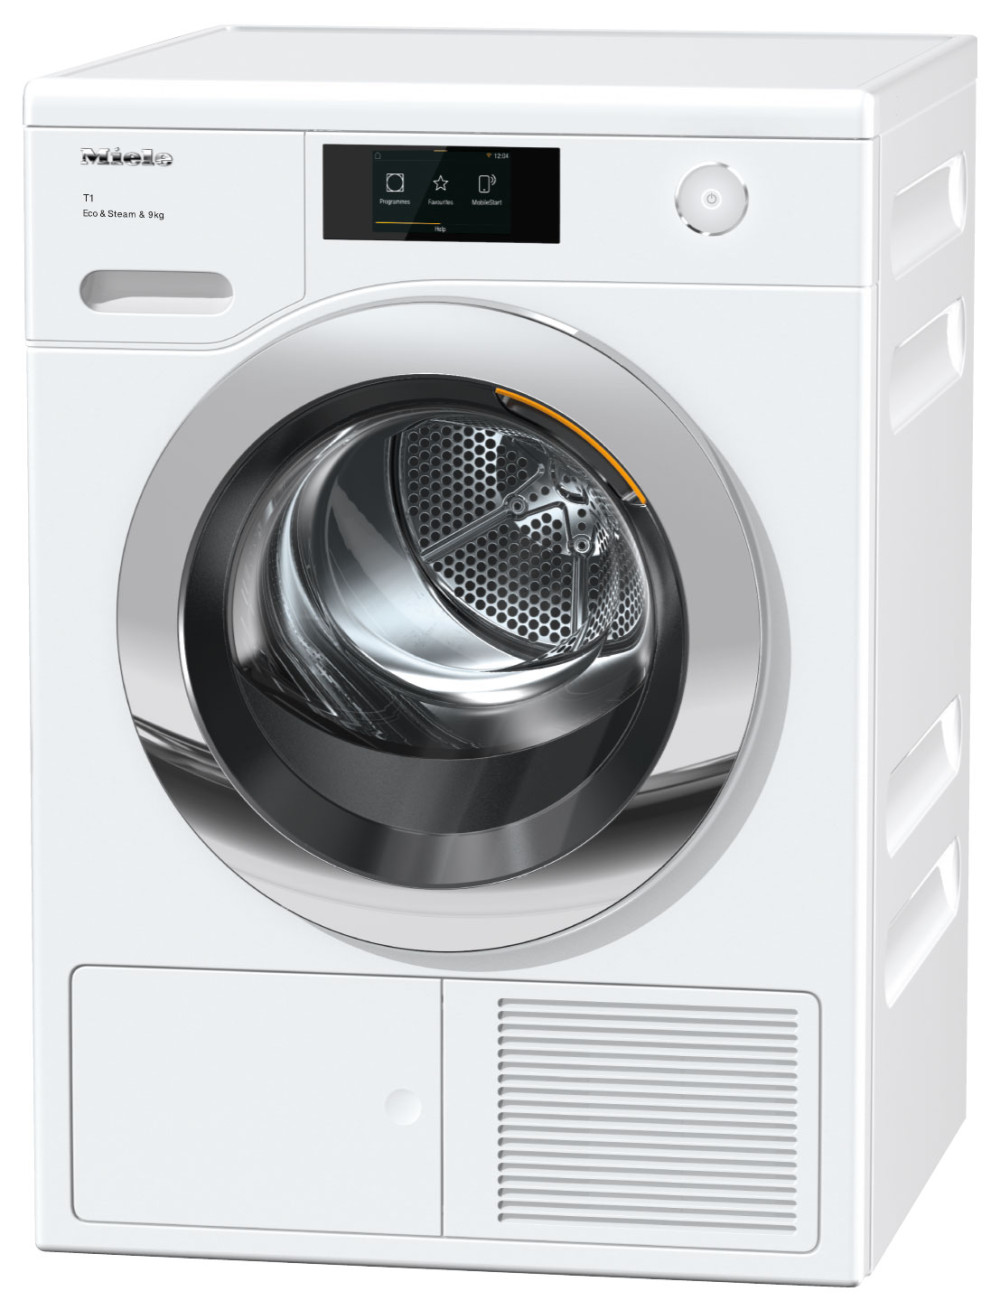 Miele TCR780 WP Eco&Steam 9kg Heat Pump Tumble Dryer featured image